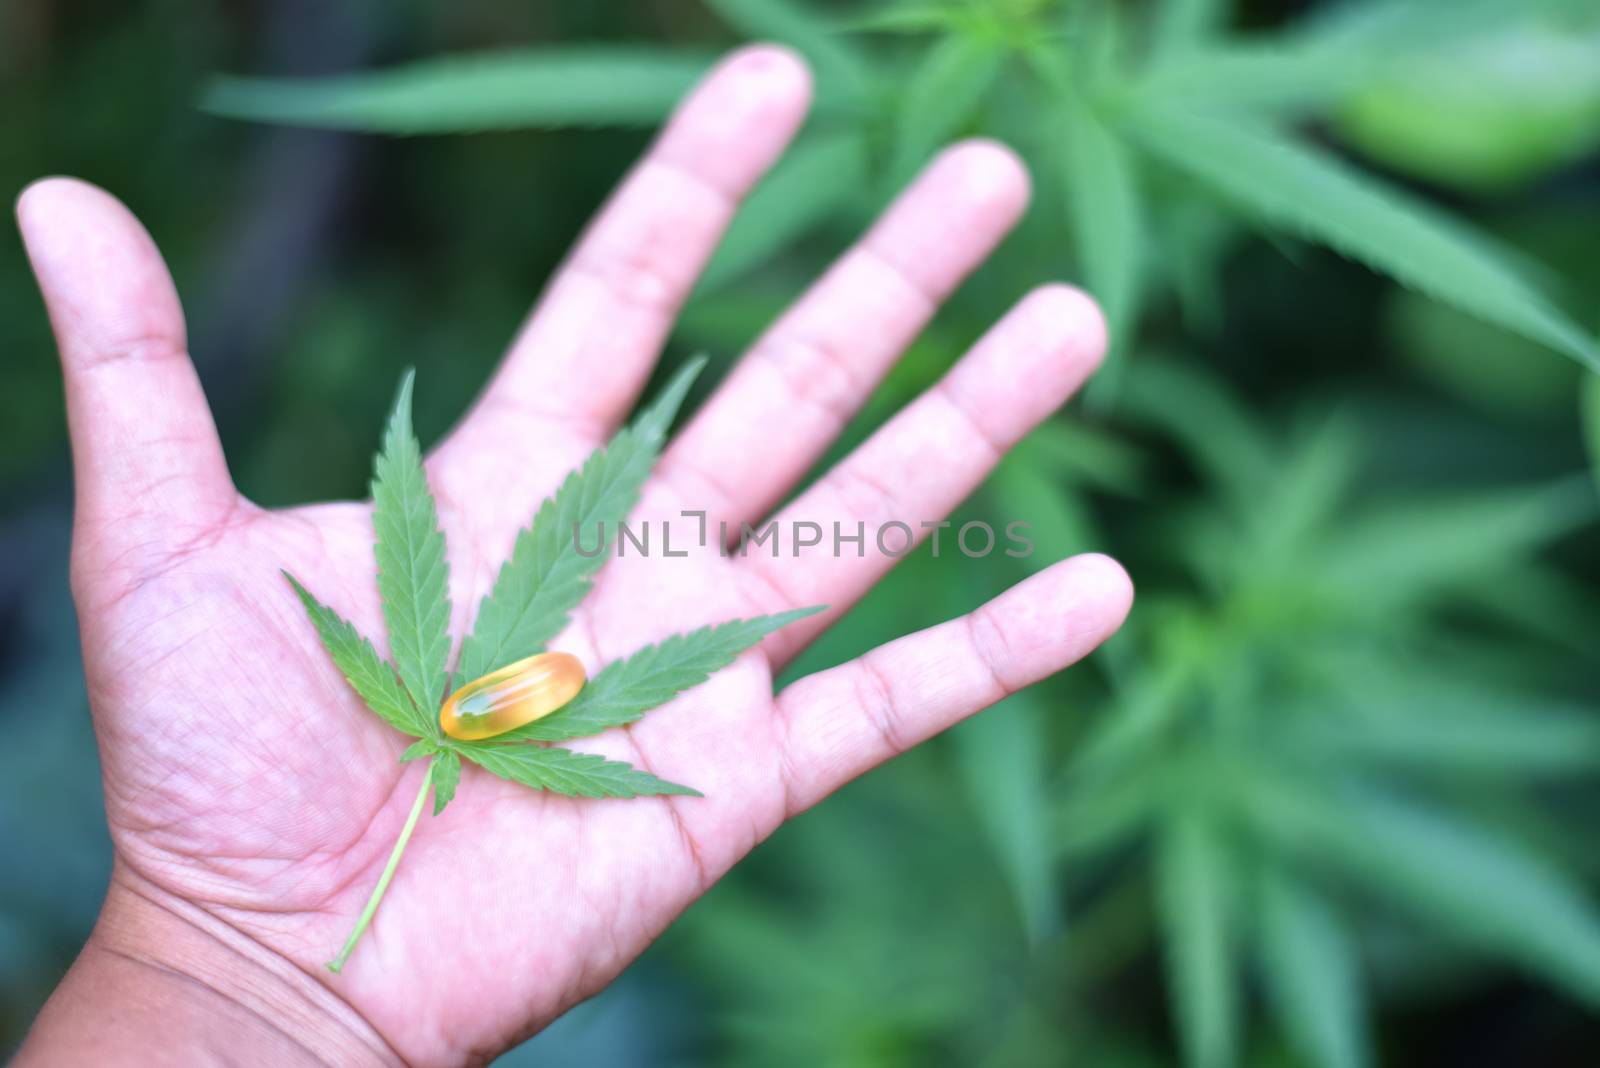 A Capsule of CBD hemp oil and cannabis leaves in the hands of re by C_Aphirak